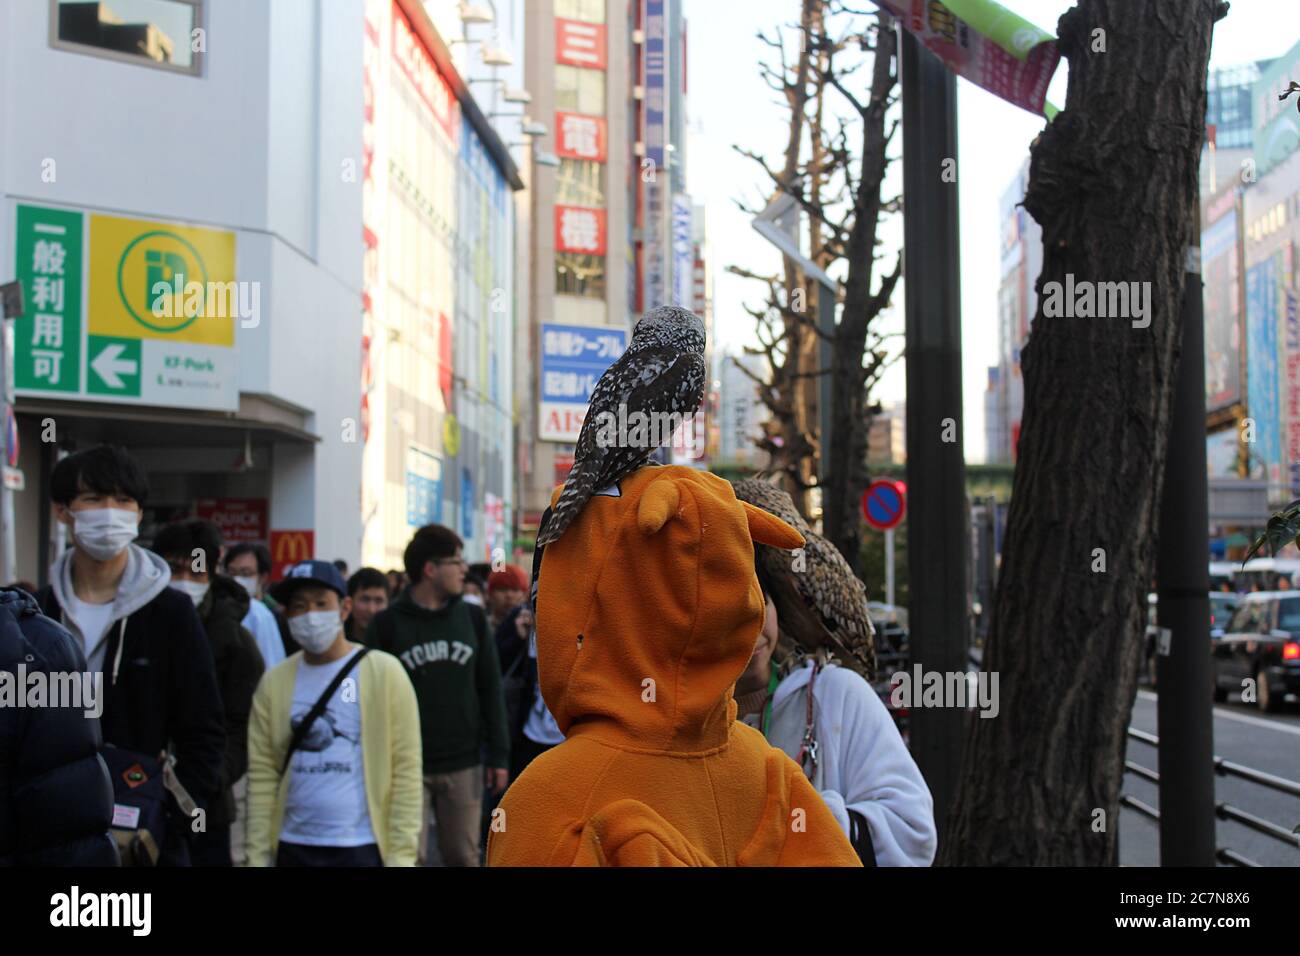 Akihabara, Tokyo, Japan - 17 March 2018: Person in orange costume with owl on their head in crowded streets of Electric Town promoting an owl cafe. Stock Photo